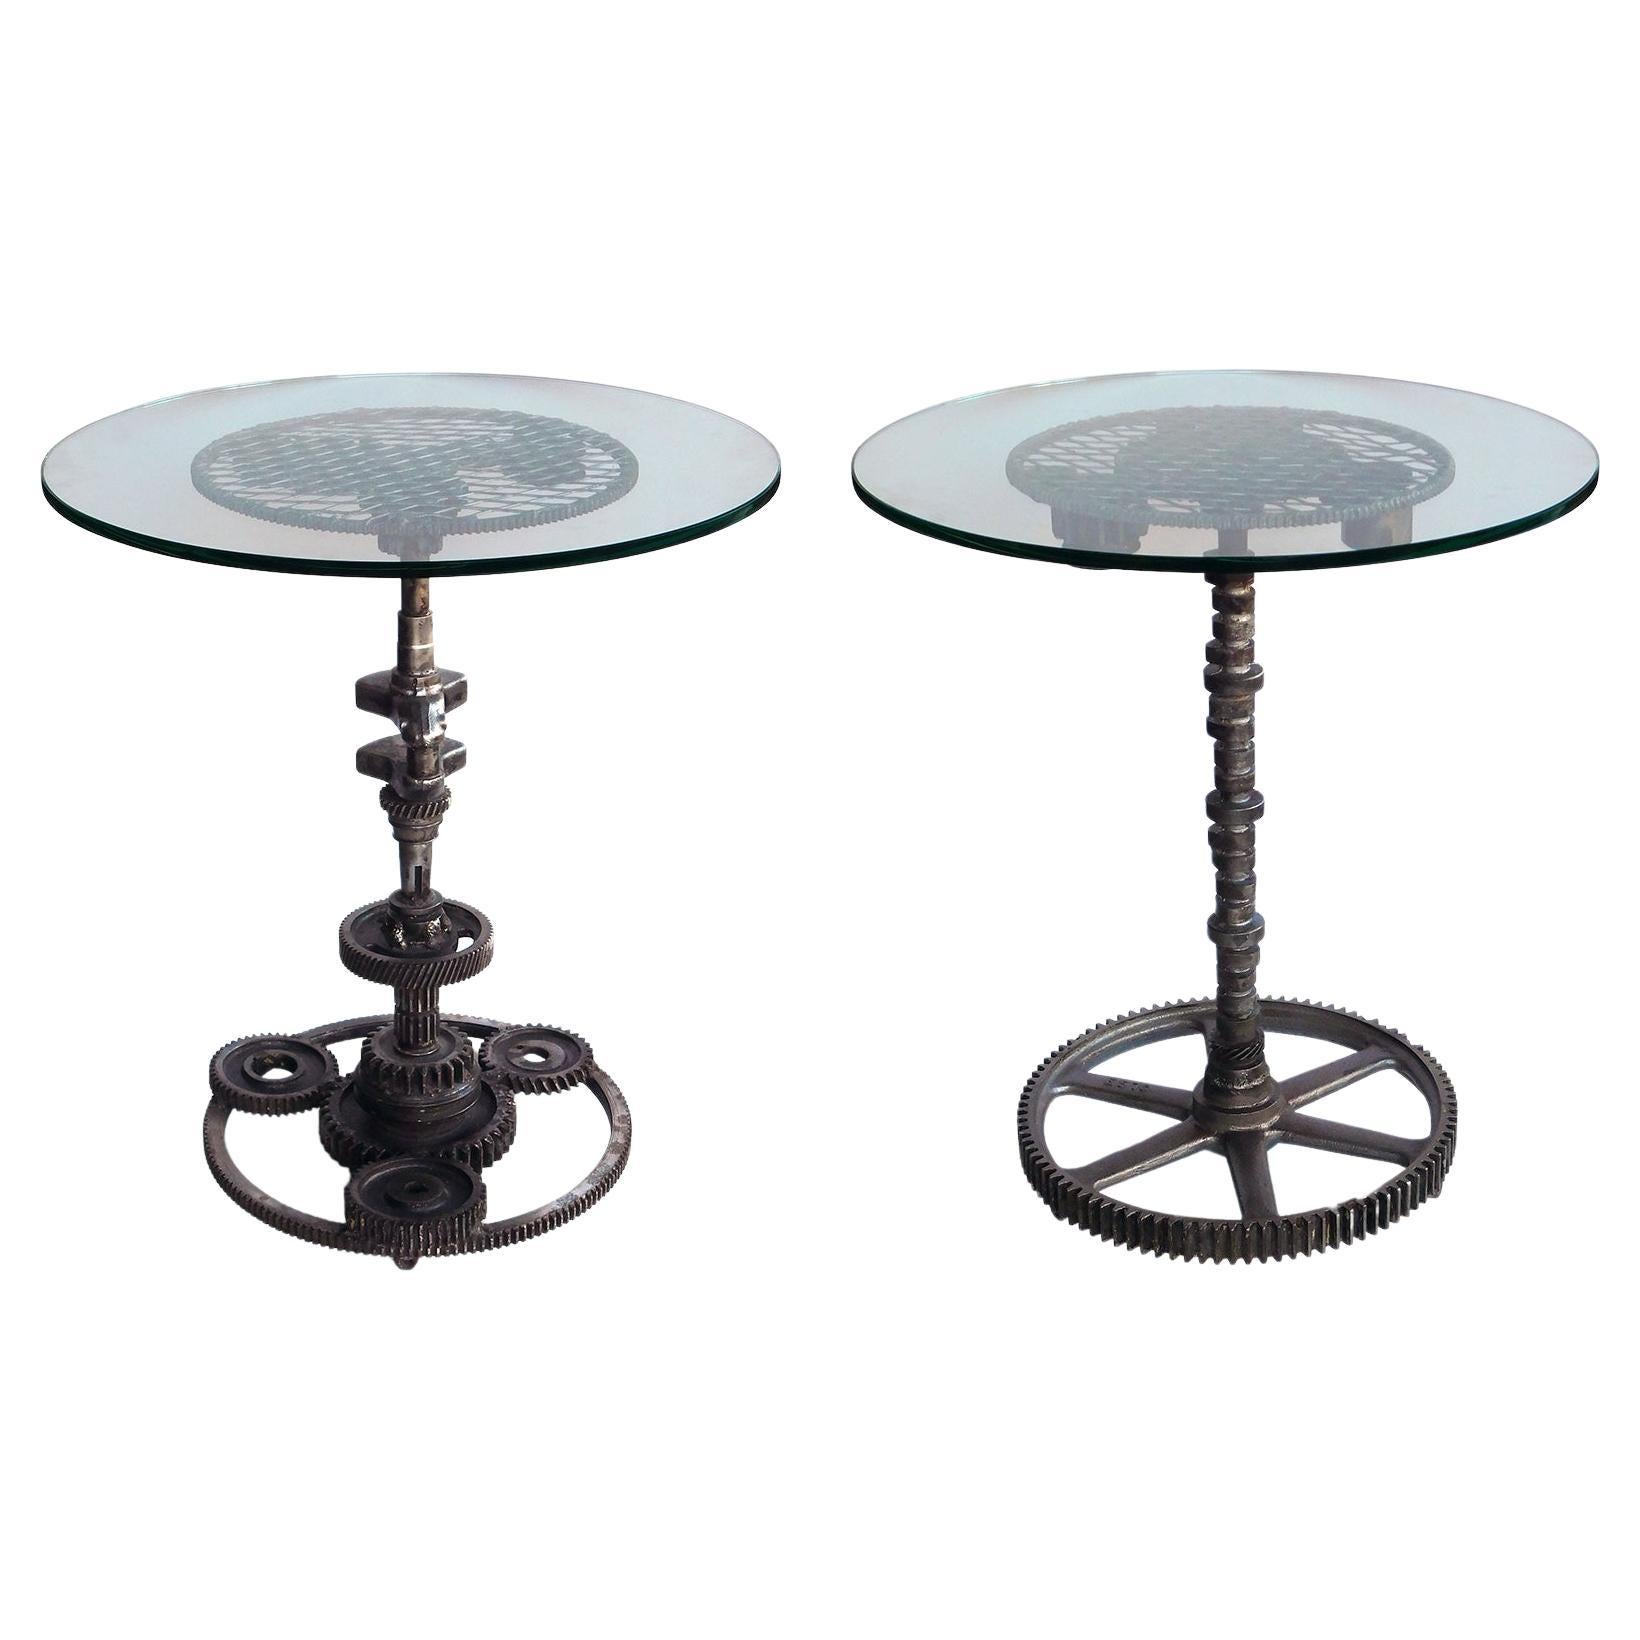 Pair of Industrial Cast Iron Gear Wheel Tables with Circular Glass Tops For Sale